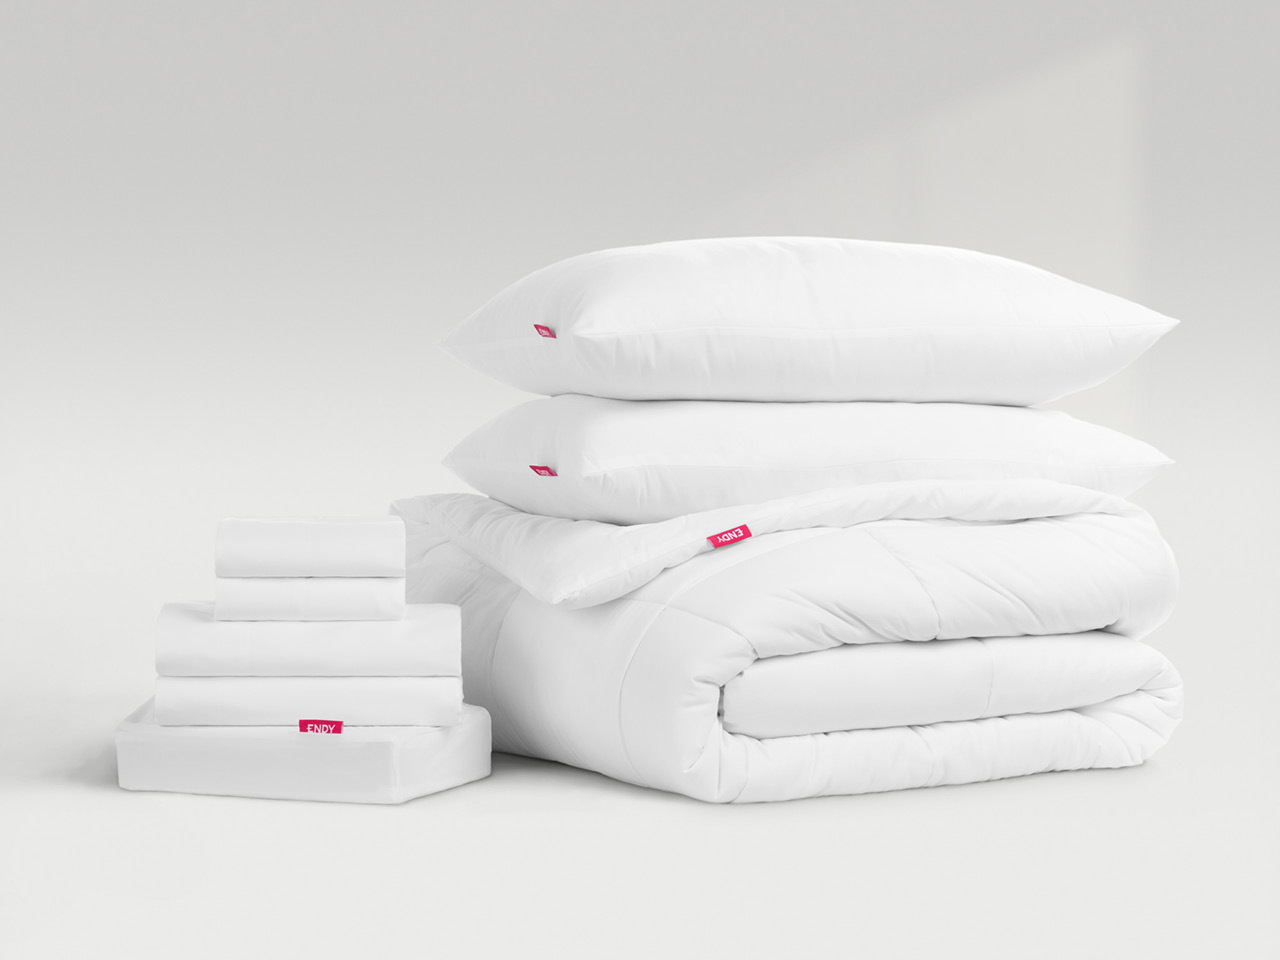 An Endy sleep set including pillows and a duvet that is part of the best Black Friday Sales.